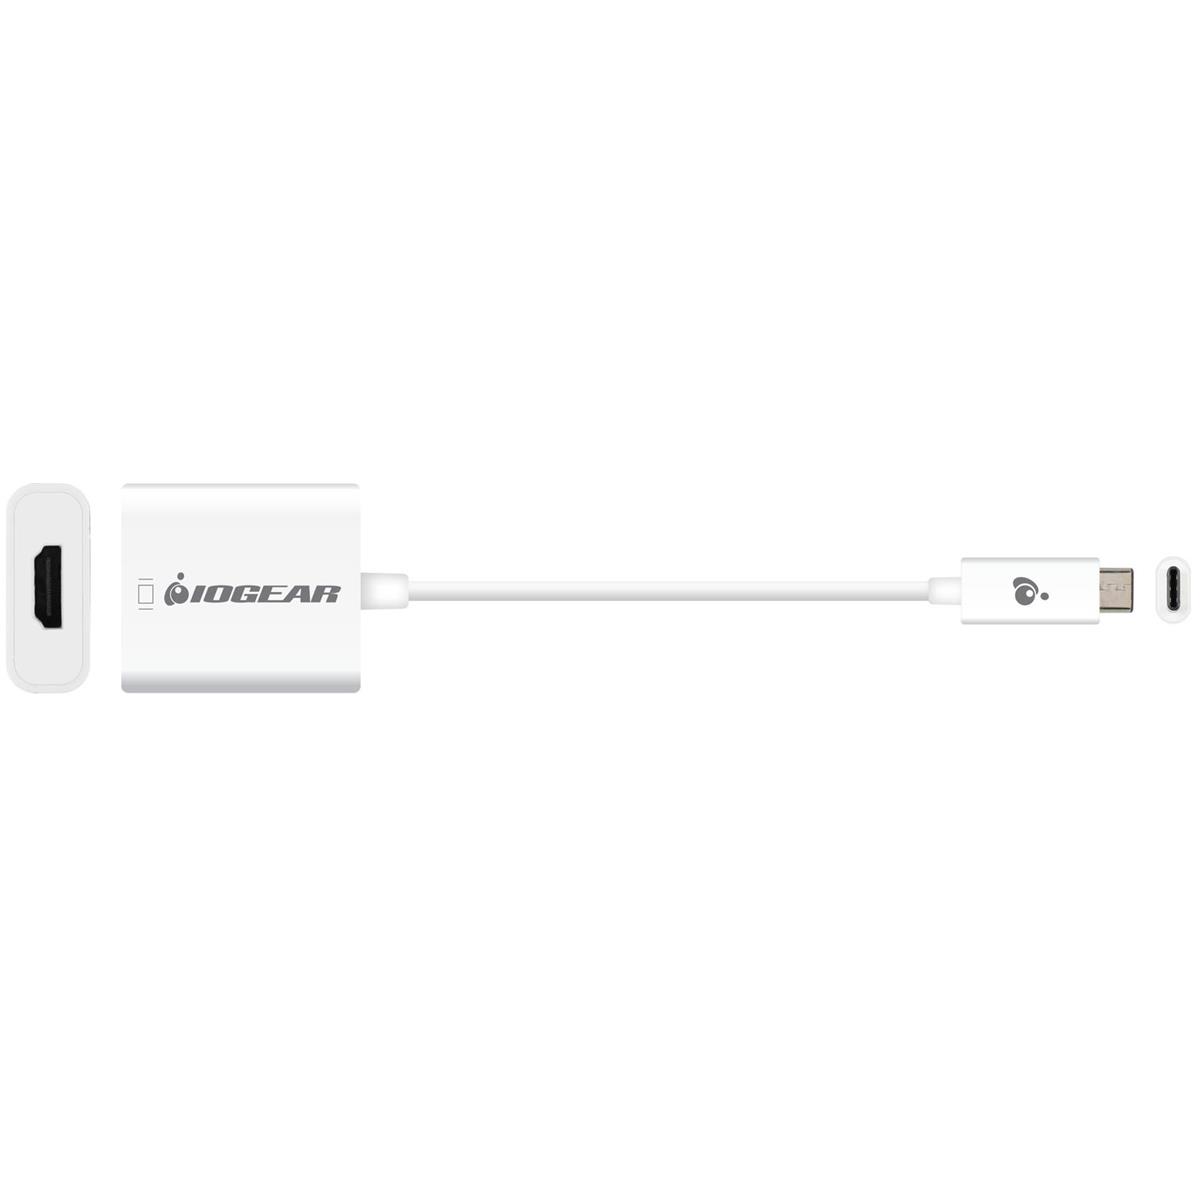 Image of IOGEAR USB 3.0 Type-C to HDMI Adapter